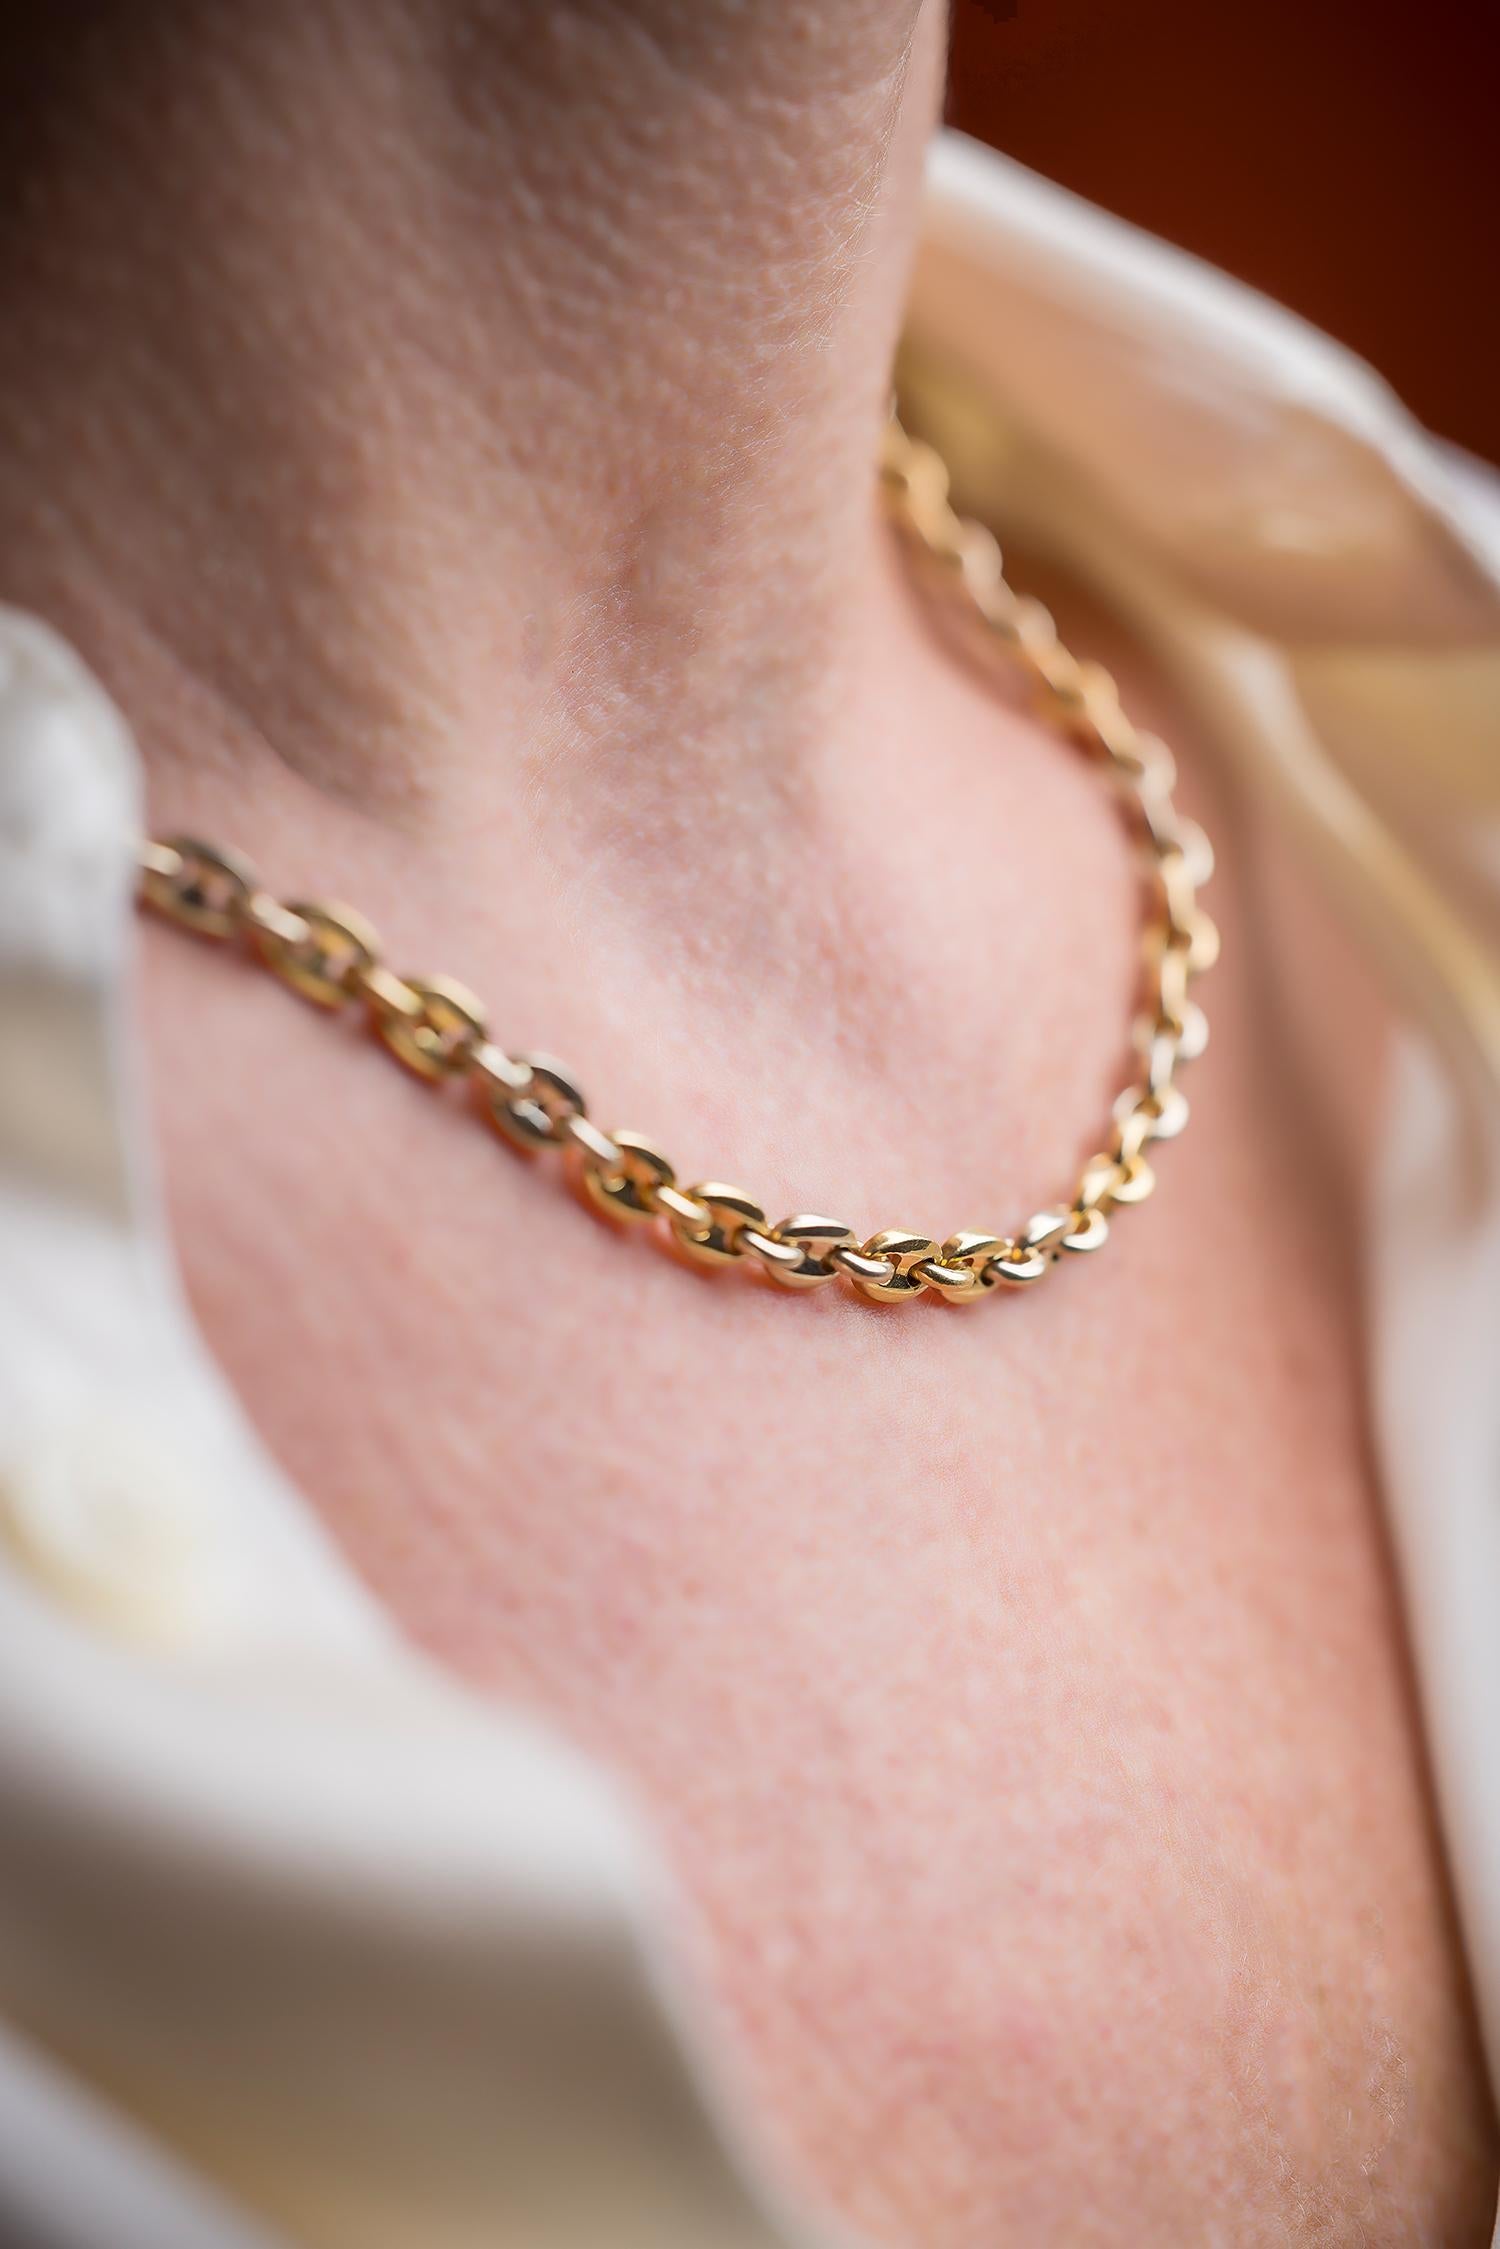 Vintage Cartier, a super versatile 18K gold bi-color necklace. A classic coffe bean design to a perfectly proportioned chain. Weighing in at almost 40 grams. Signed and numbered.

Insignificant wear.

Length 45 cm. Width 5 mm.
Weight 39.5 g.

Marked